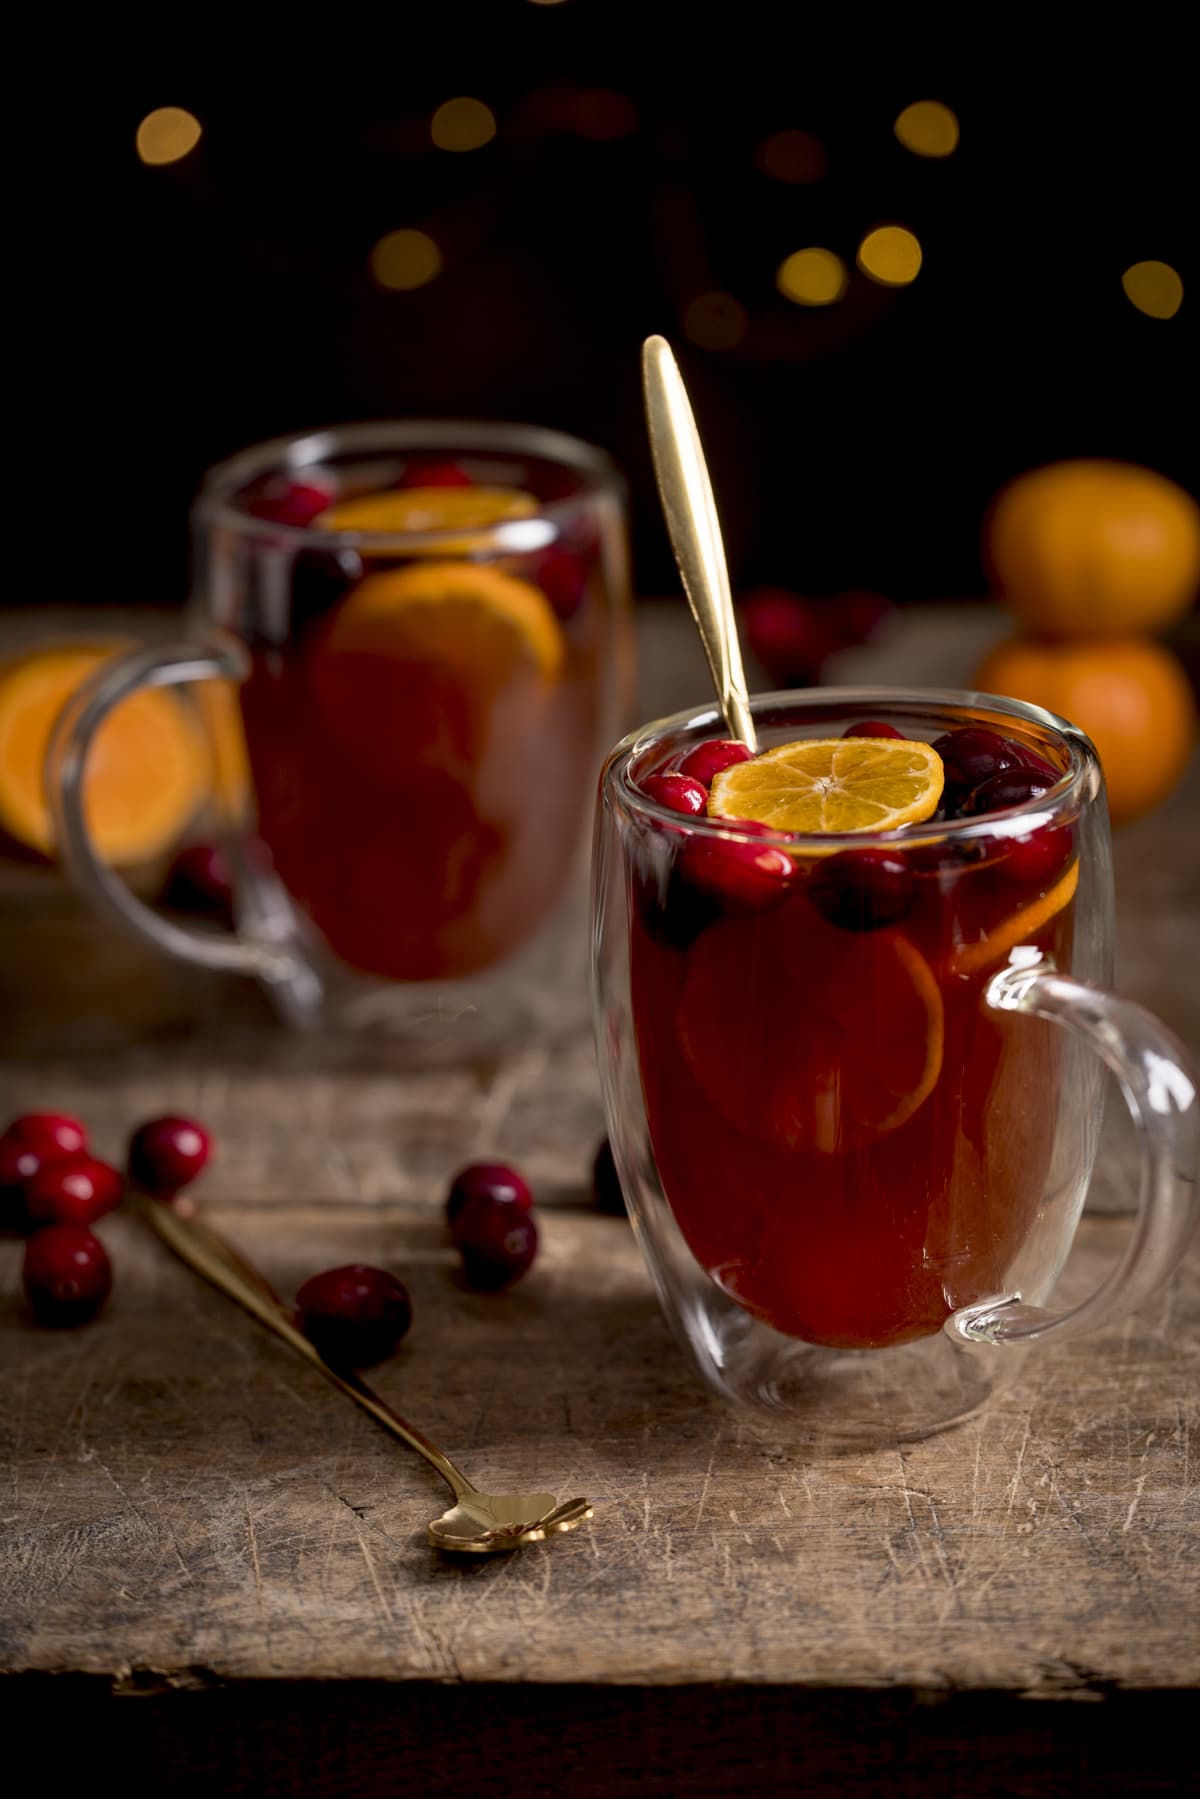 2 glass mugs filled with mulled cider. There are clementine slices and cranberries in the cider and the mugs are on a wooden table. The front mug has a gold teaspoon in it.